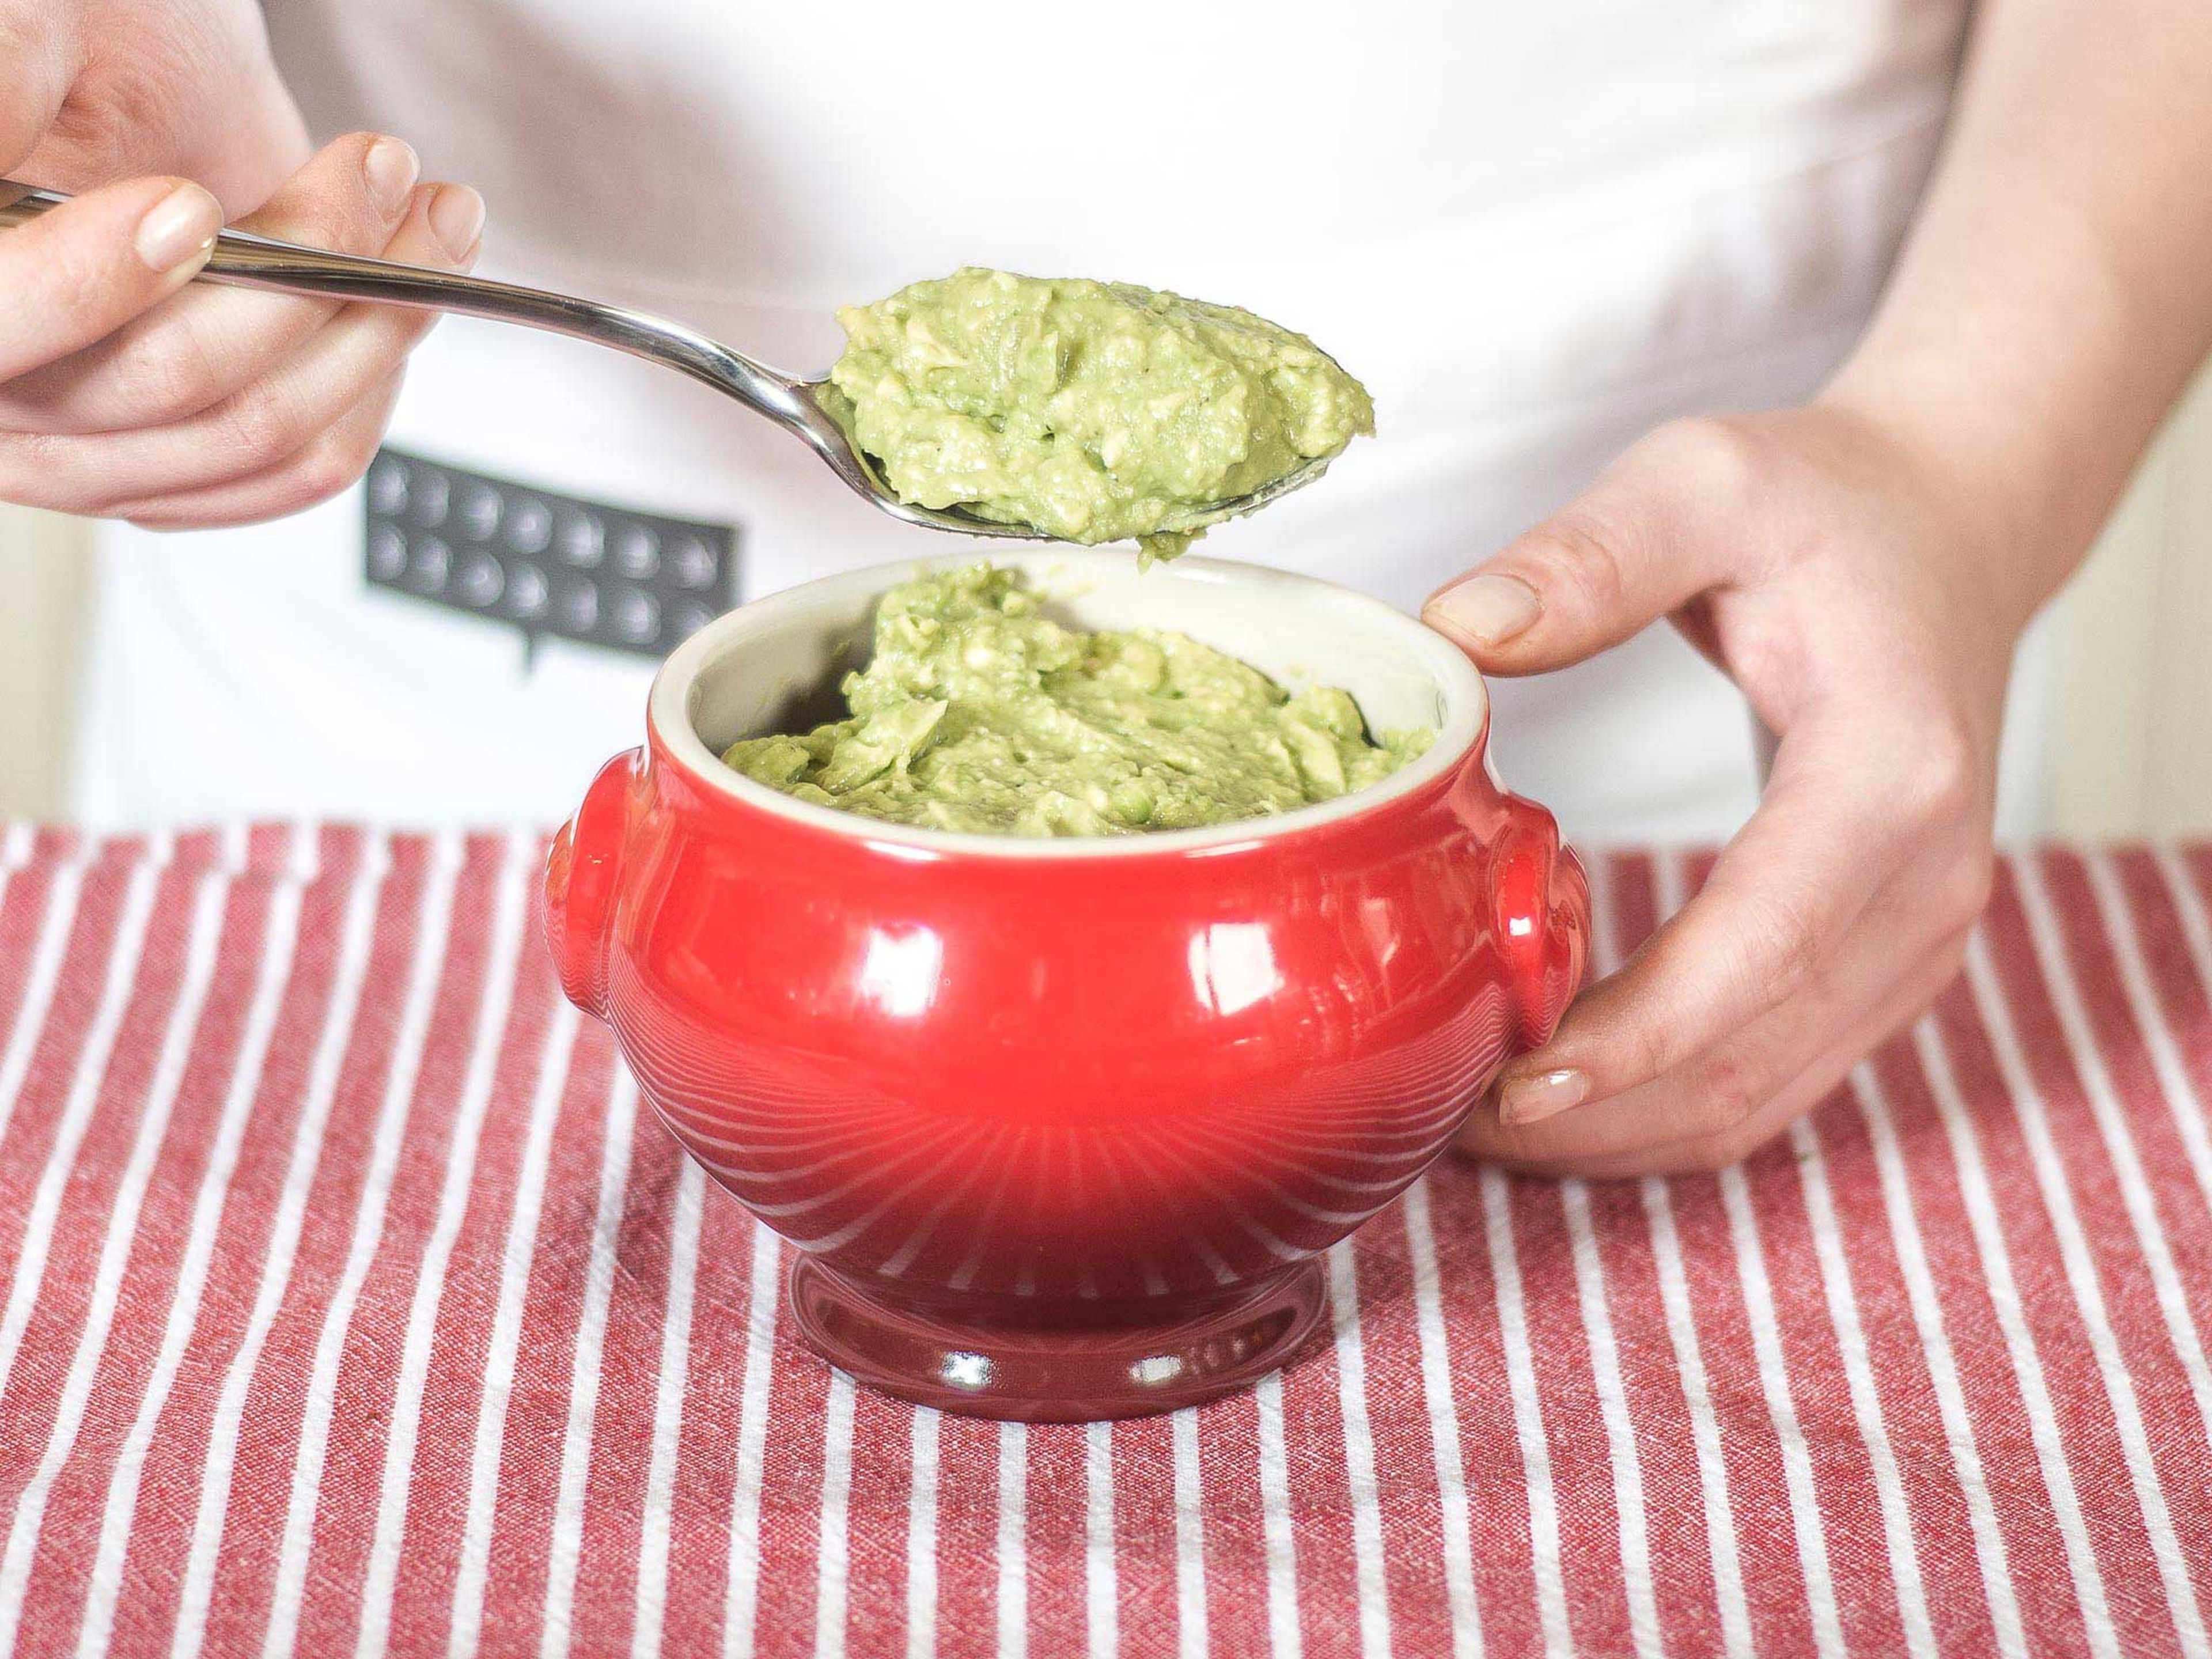 Next, fill the tumblers with the avocado crème.